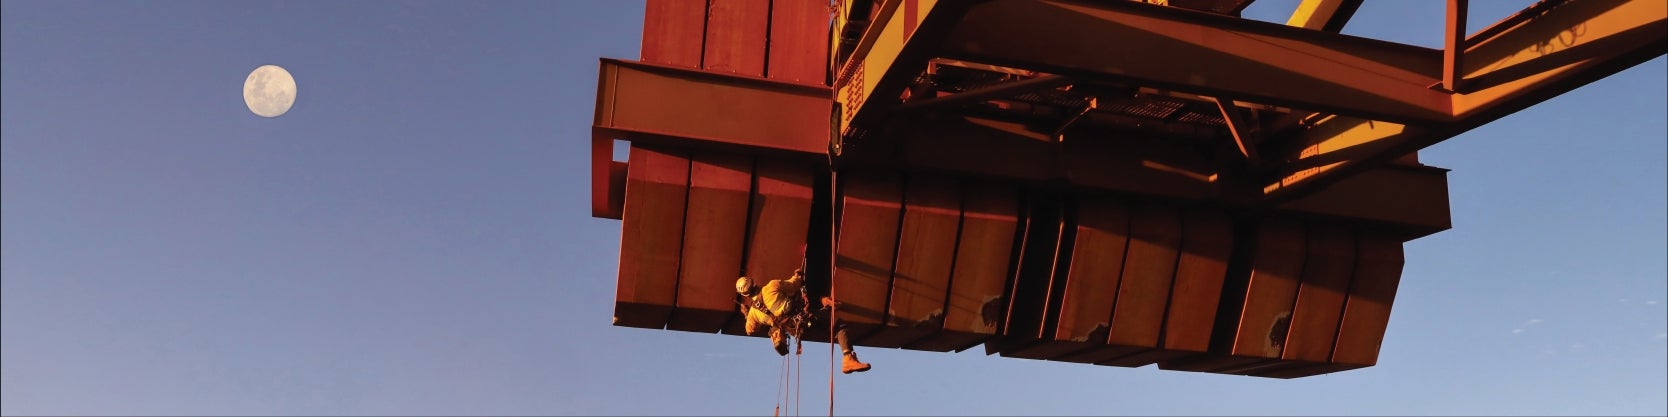 Texcan - Industries (View All) Banner Image: Man with harness climbing large crane in an industrial environment